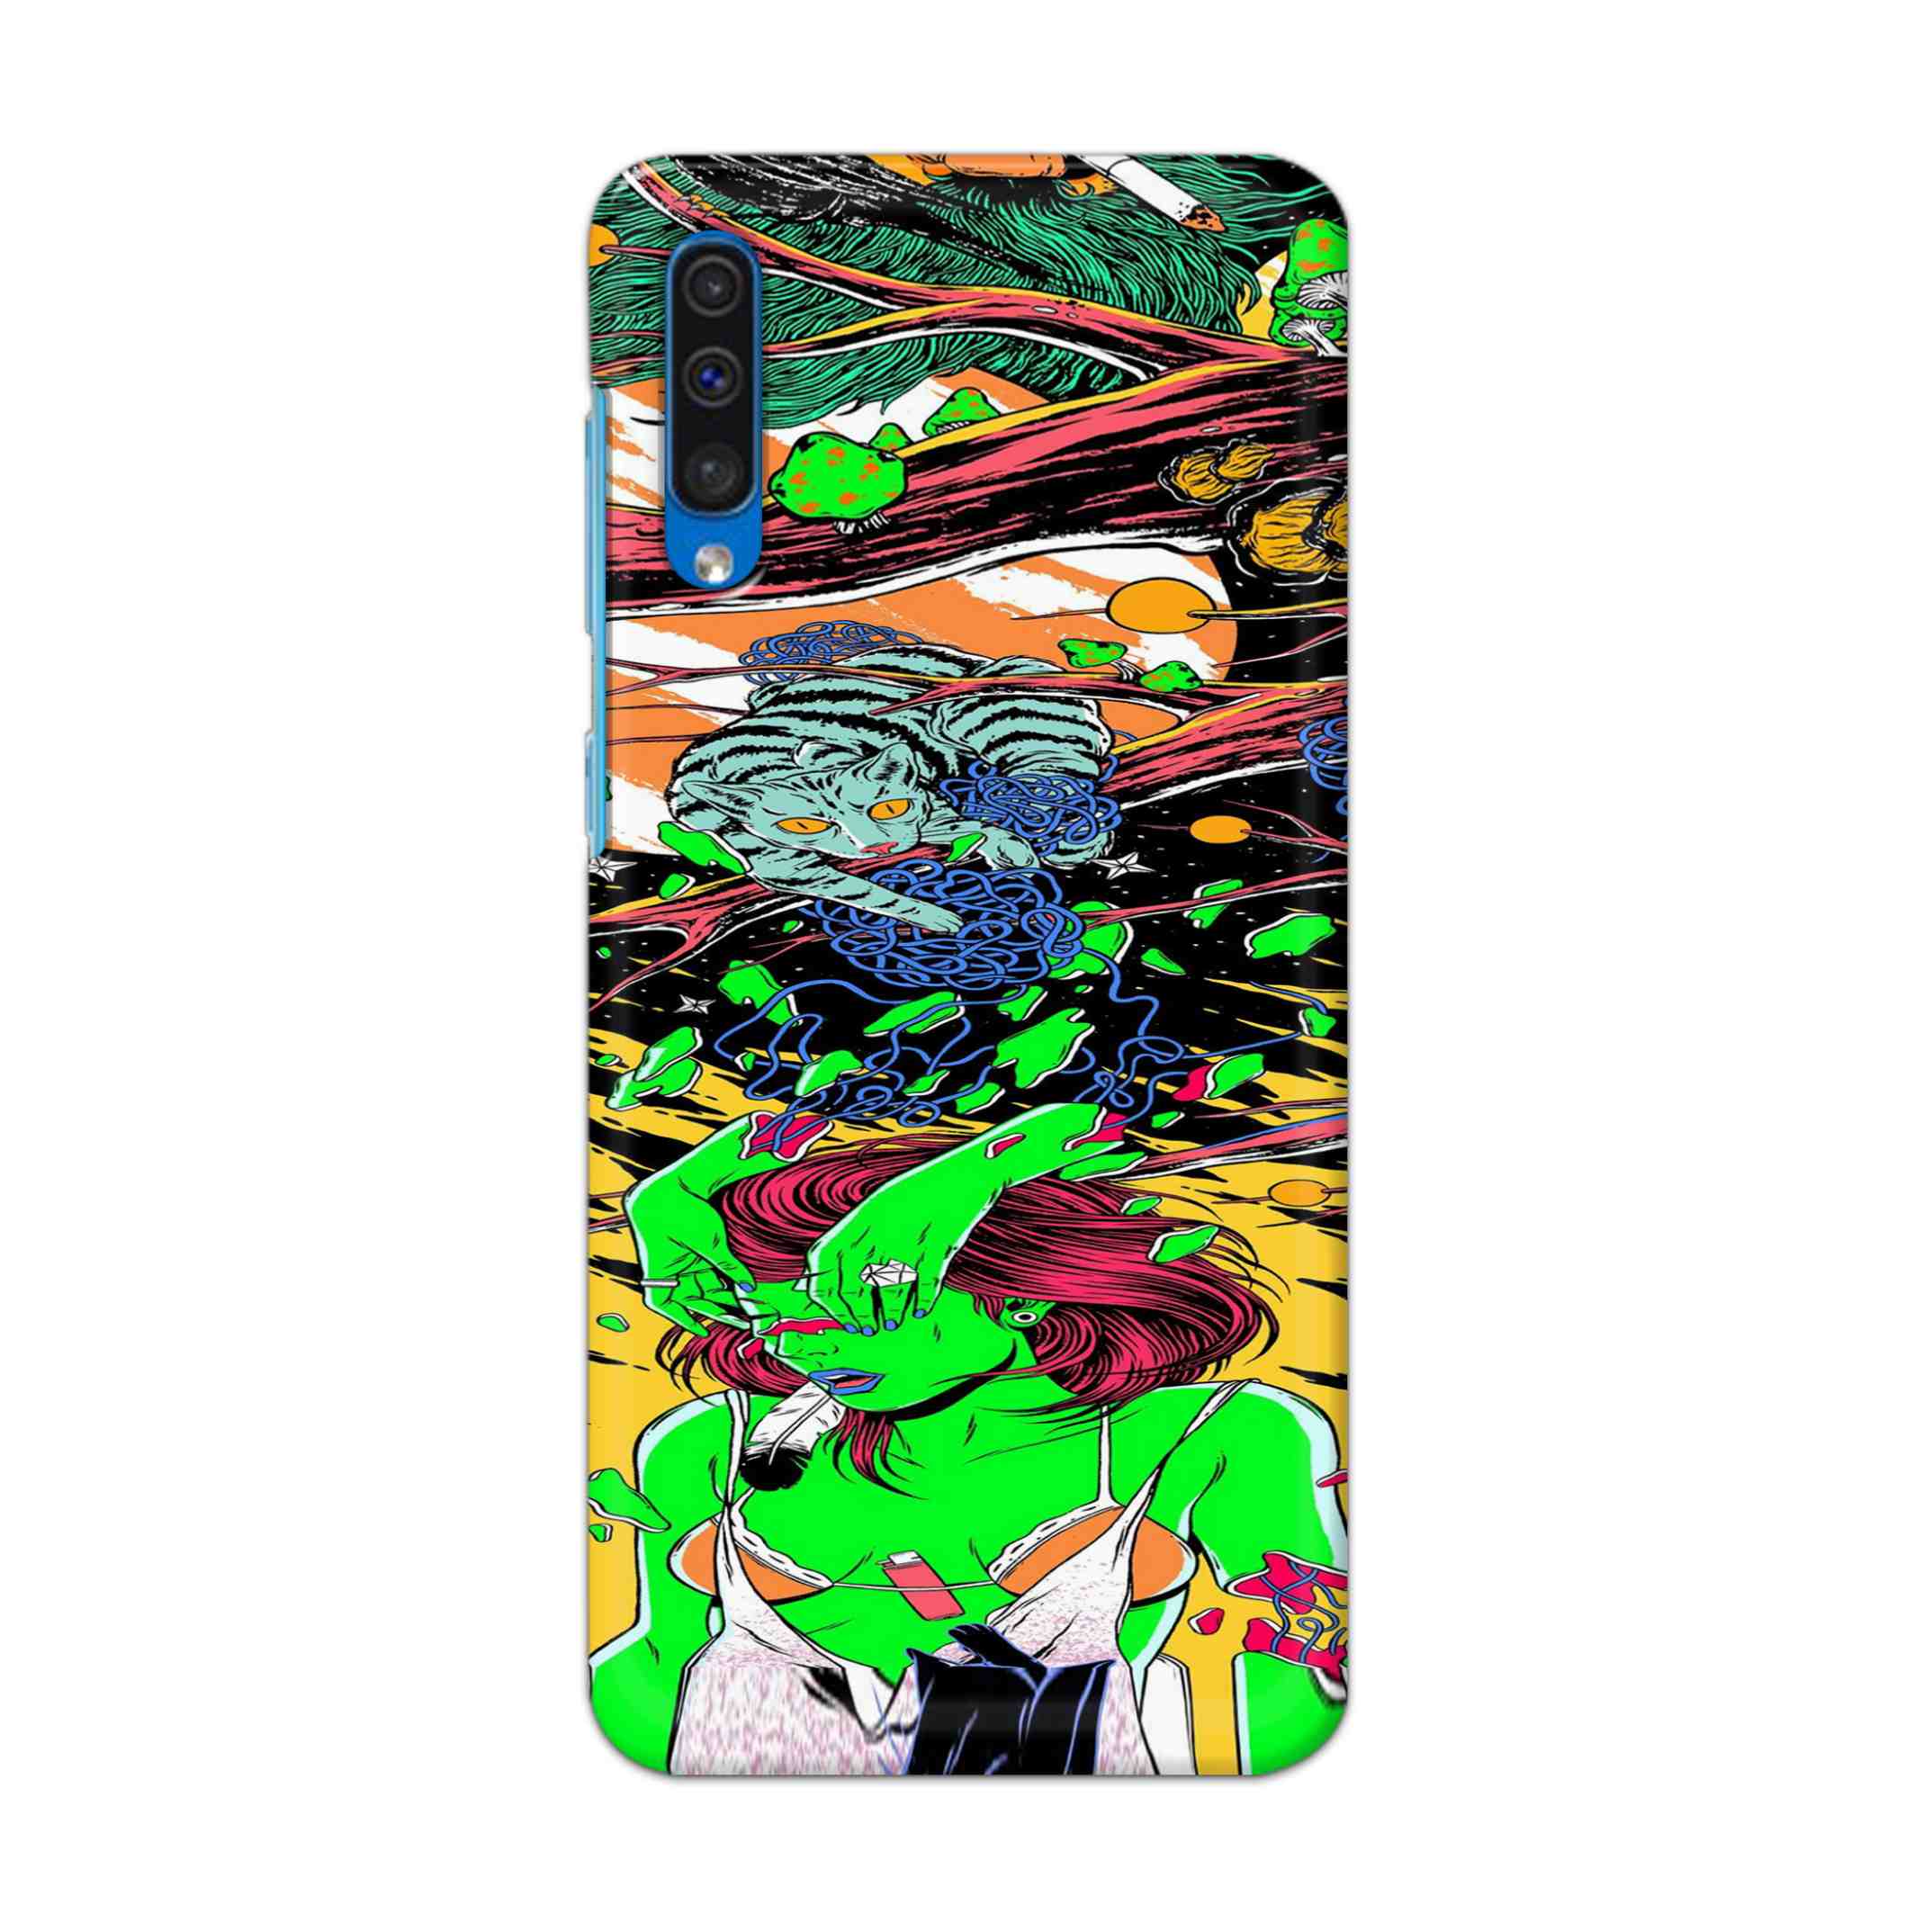 Buy Green Girl Art Hard Back Mobile Phone Case Cover For Samsung Galaxy A50 / A50s / A30s Online